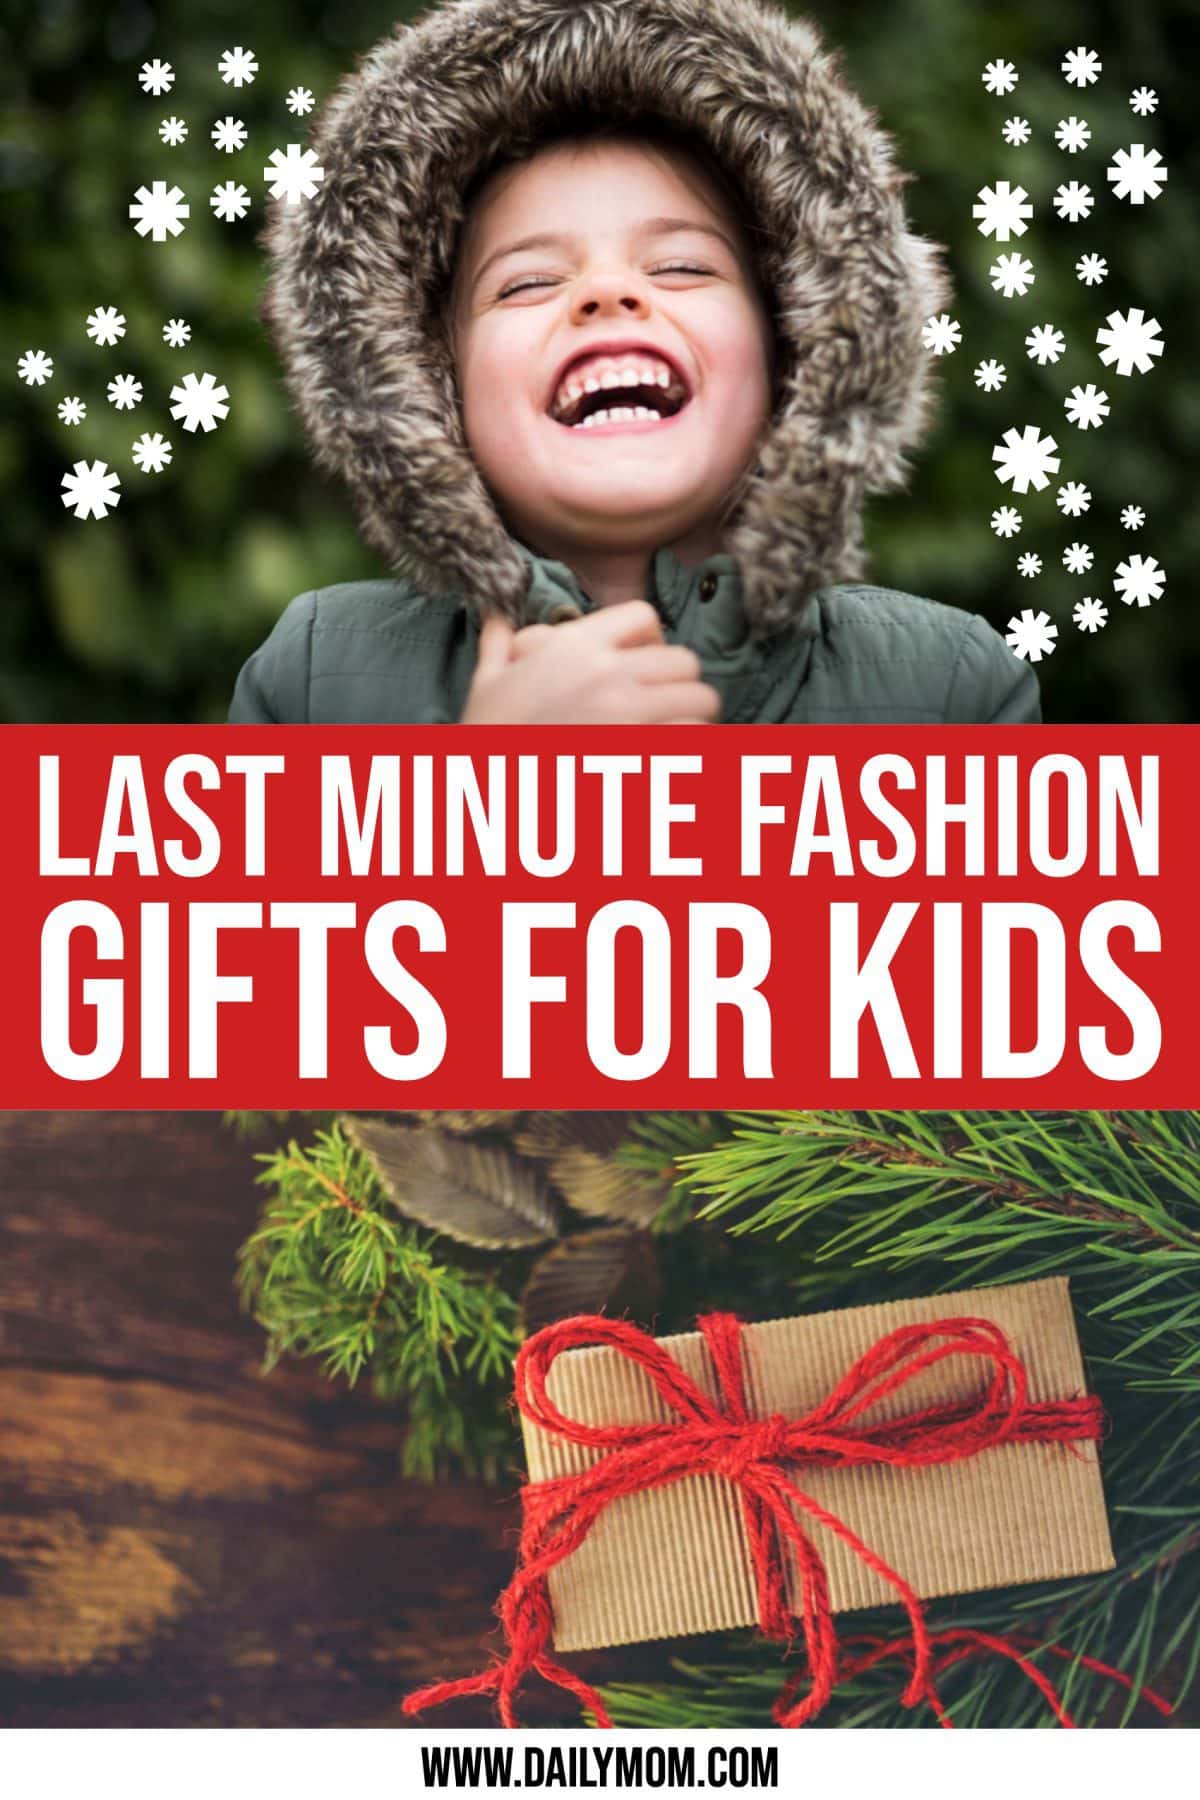 17 Last Minute Christmas Gifts For Fashionable Kids {2019}